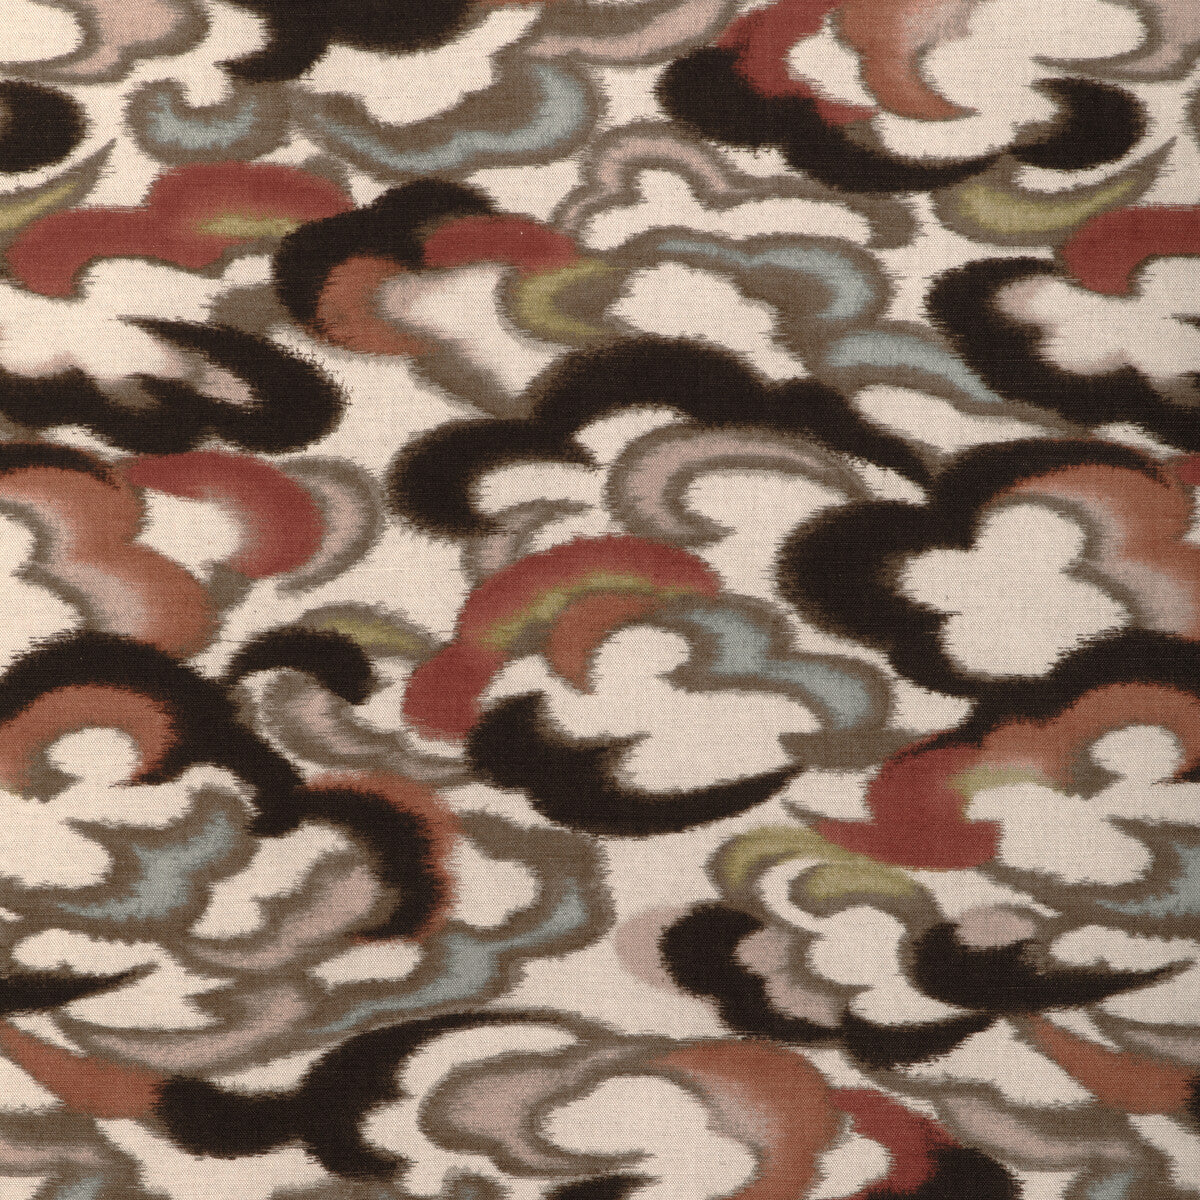 Stratus Print fabric in clay/multi color - pattern 8023138.3524.0 - by Brunschwig &amp; Fils in the Celeste collection